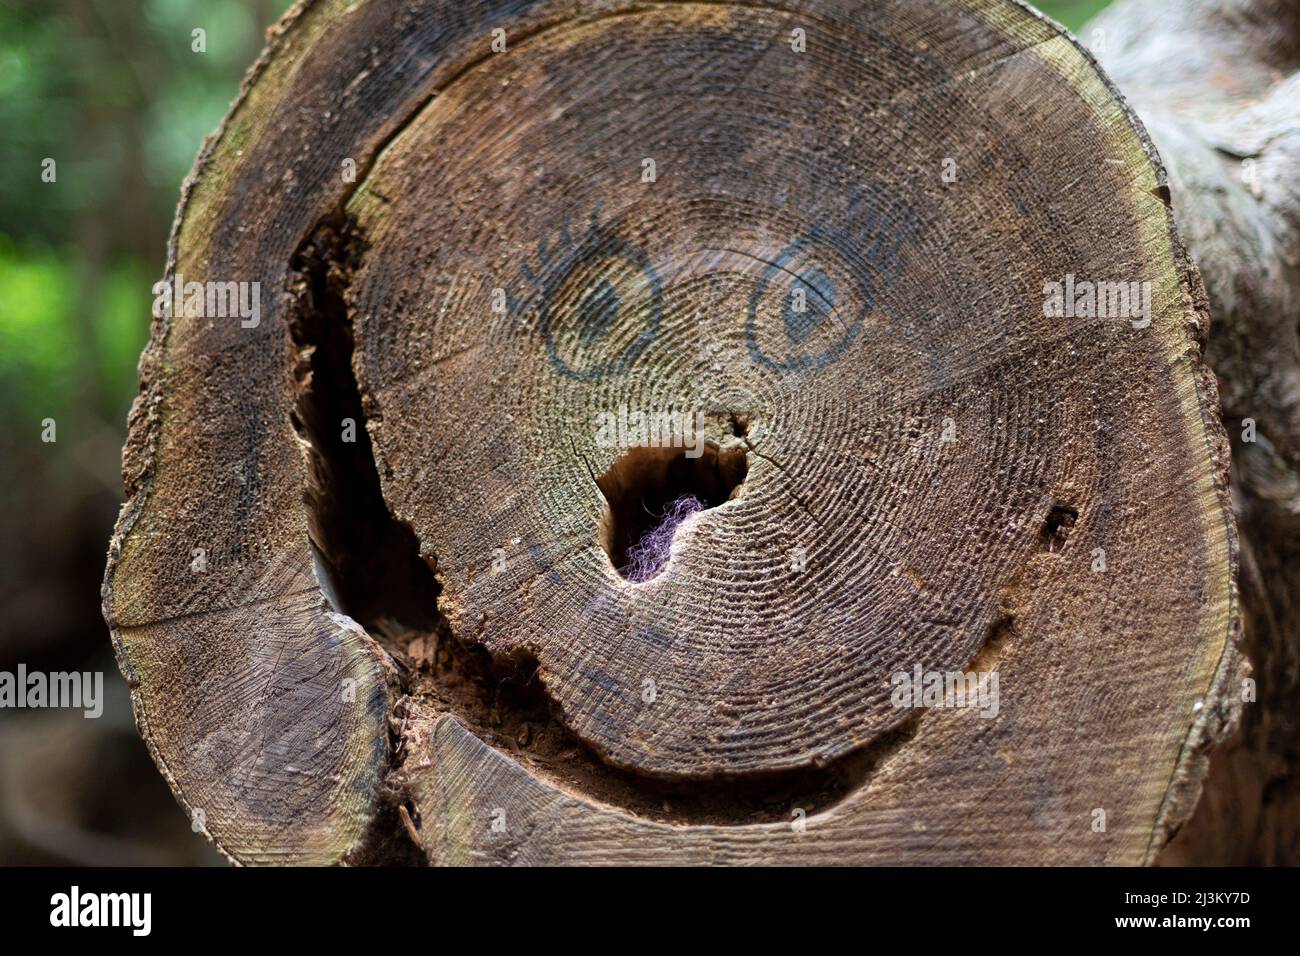 Eyes drawn with marker on the end of a cut log with holes to resemble a happy face, Smuggler Cove Marine Provincial Park; British Columbia, Canada Stock Photo